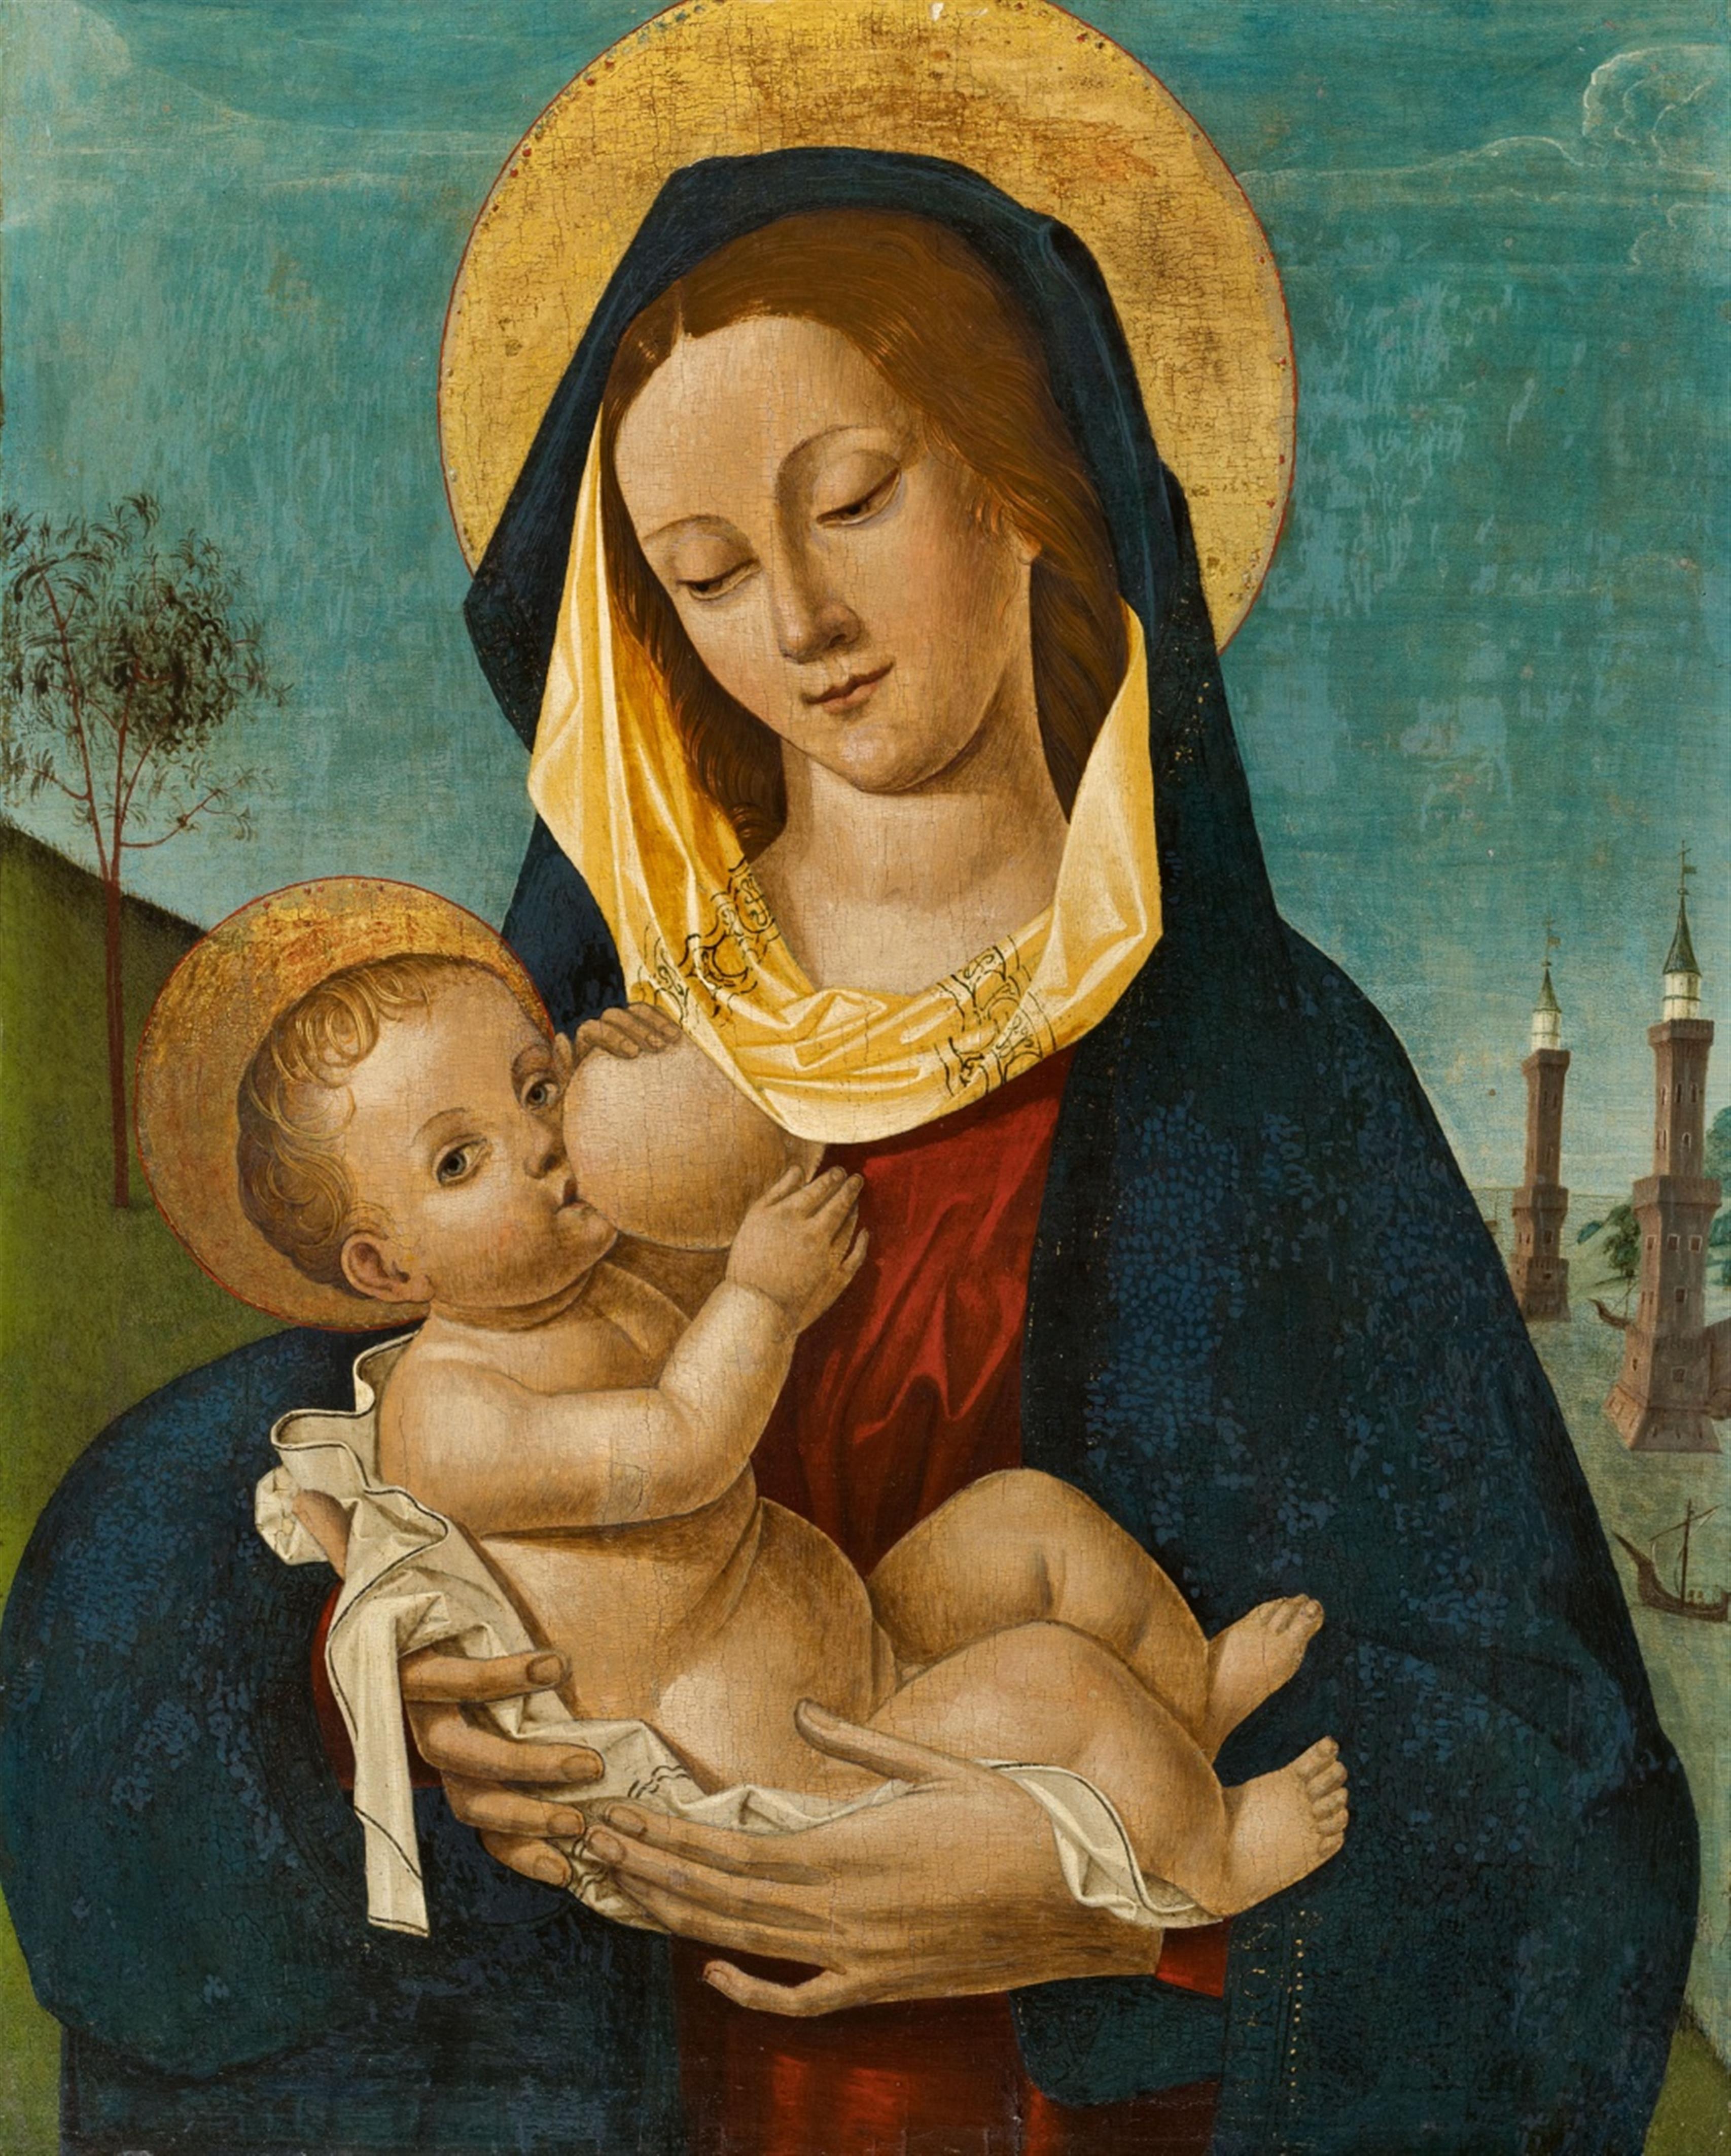 North Italian School active around 1500 in Lombardy - The Virgin and Child - image-1